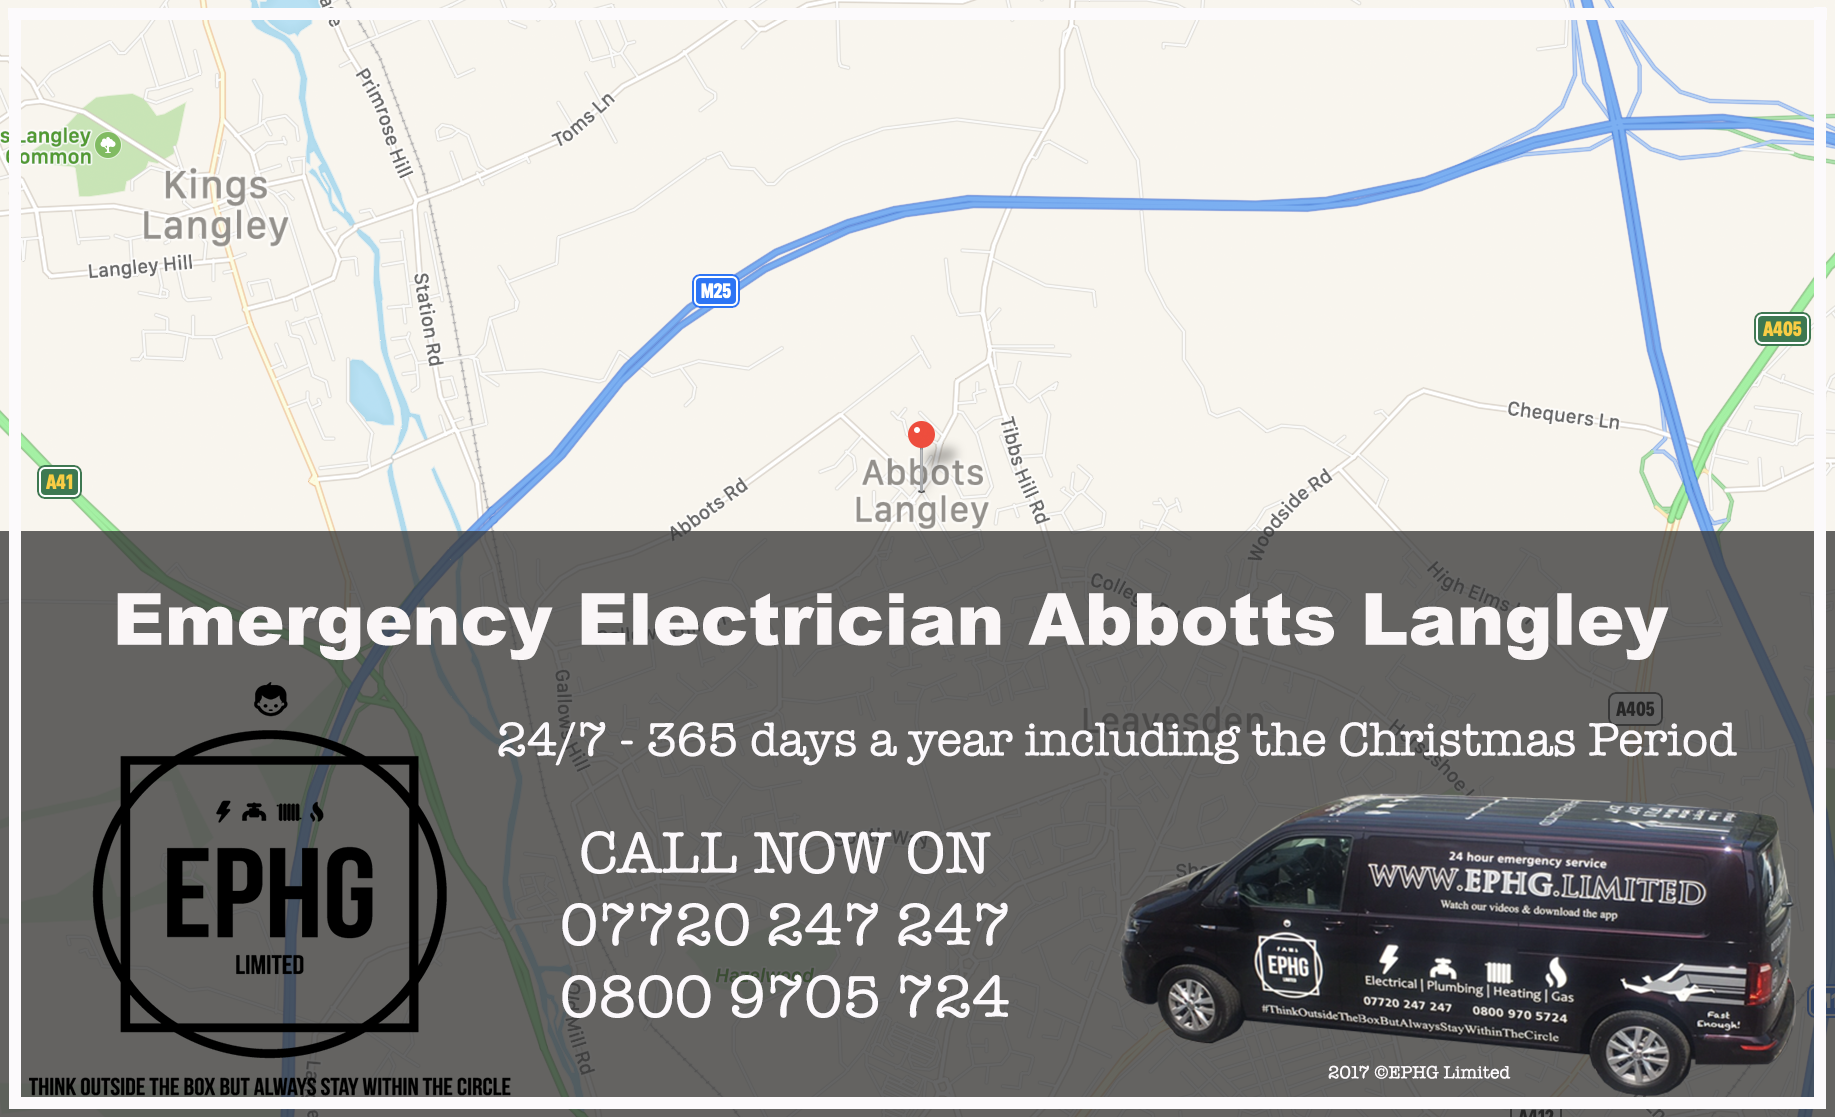 24 Hour Emergency Electrical Abbots Langley